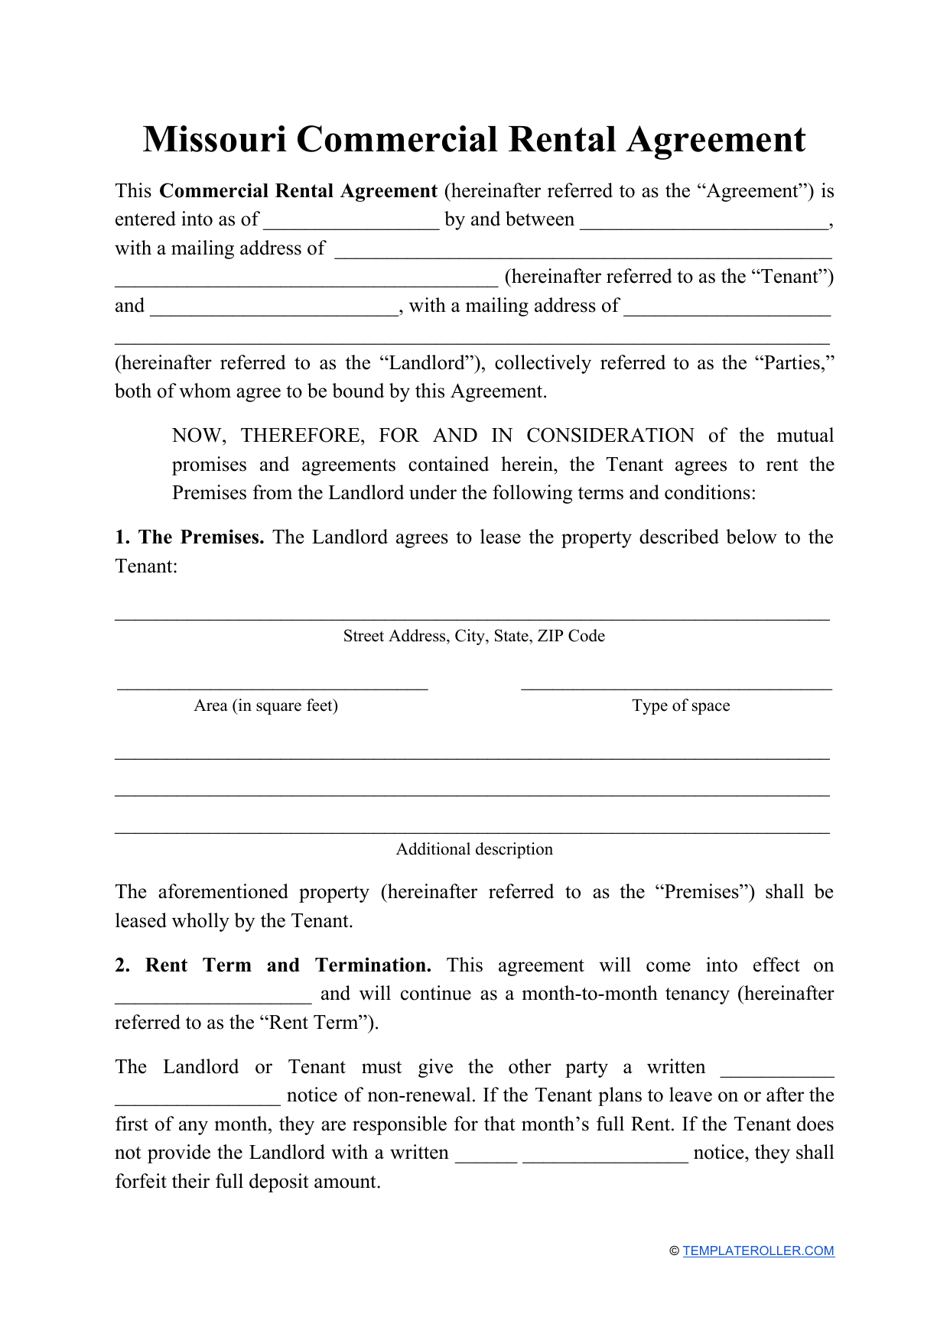 Missouri Commercial Rental Agreement Template Download Printable PDF